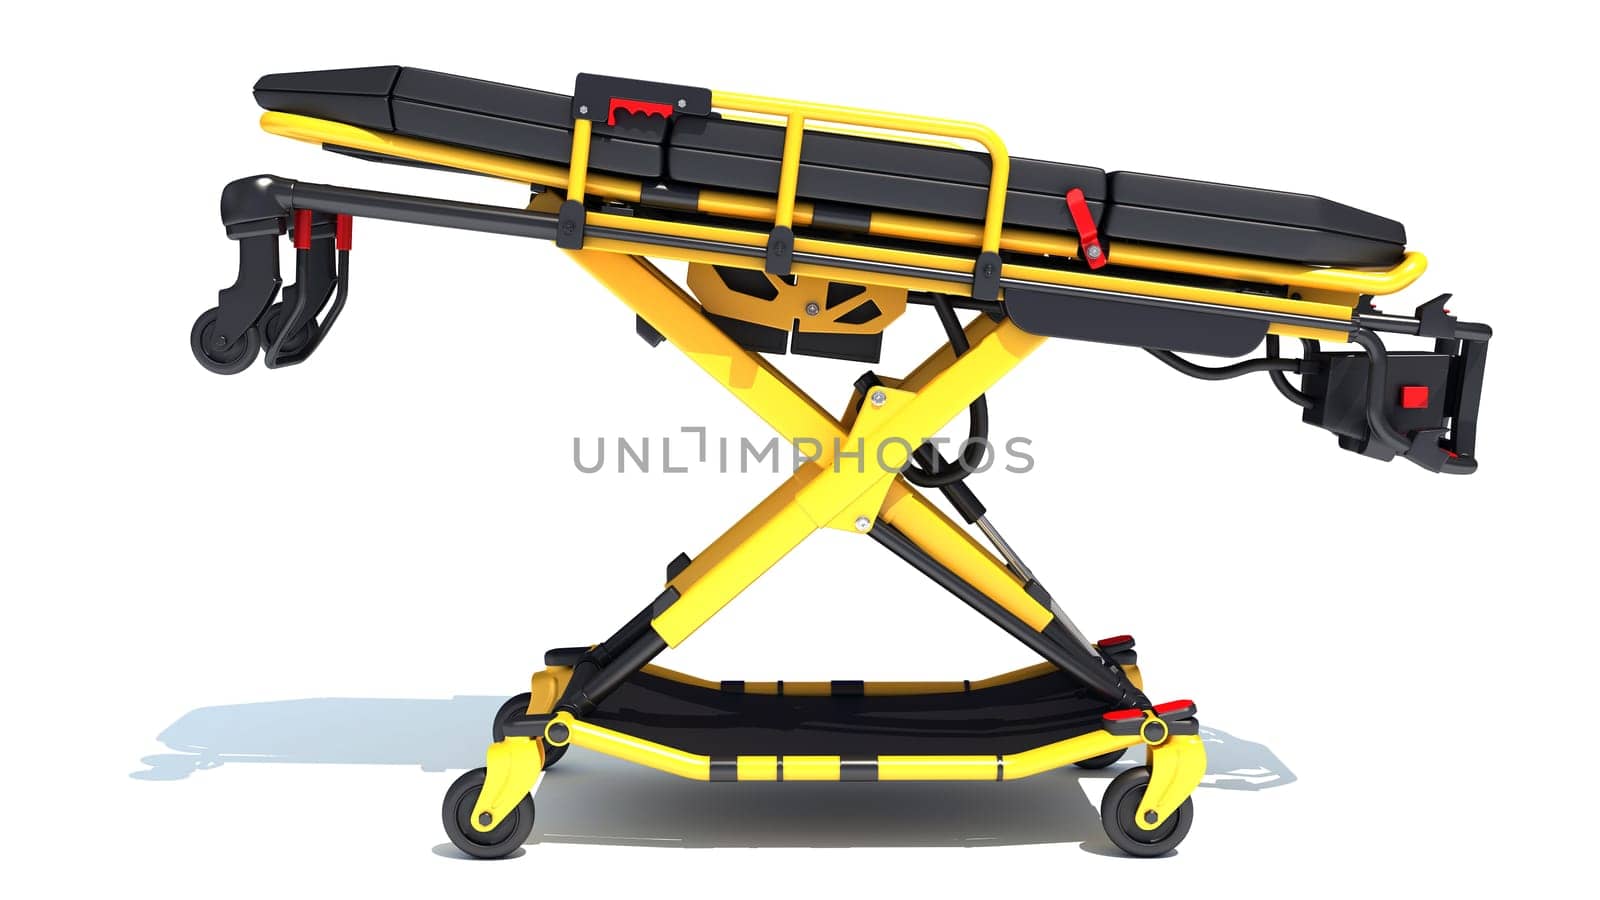 Stretcher Trolley medical equipment 3D rendering on white background by 3DHorse